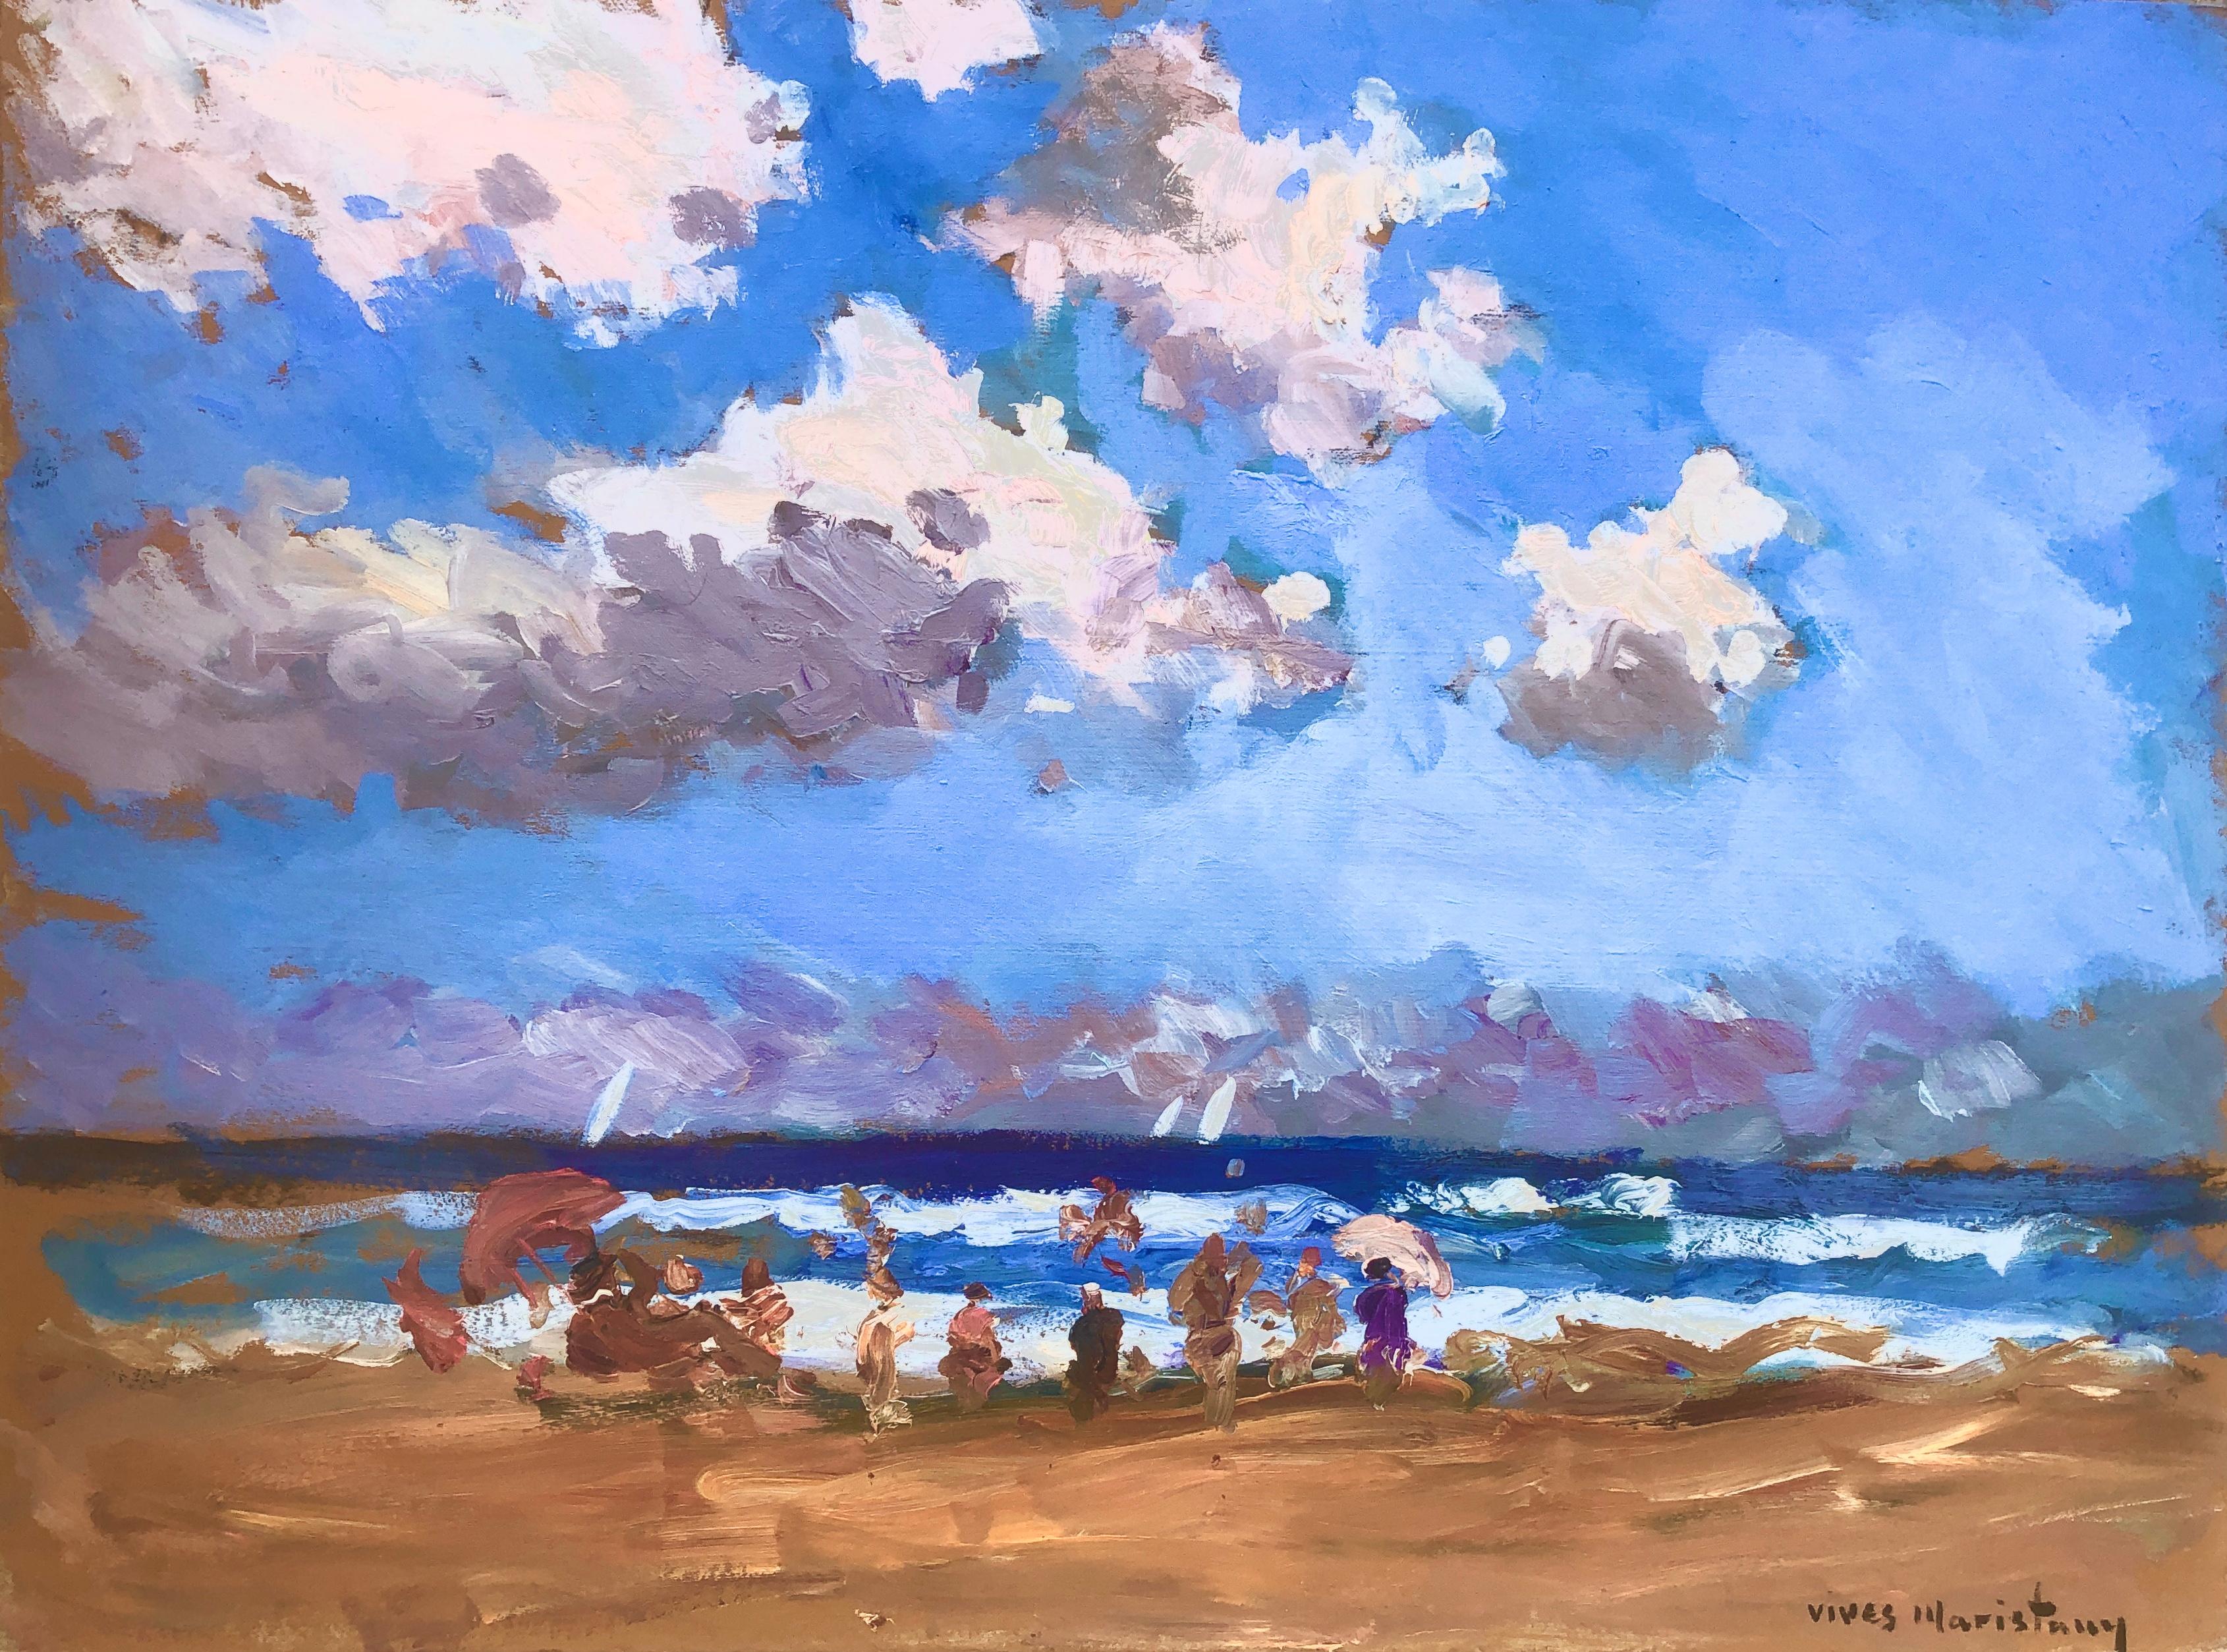 Joan Vives Maristany Landscape Painting - Beach's day oil on cardboard painting impressionist seascape Spain